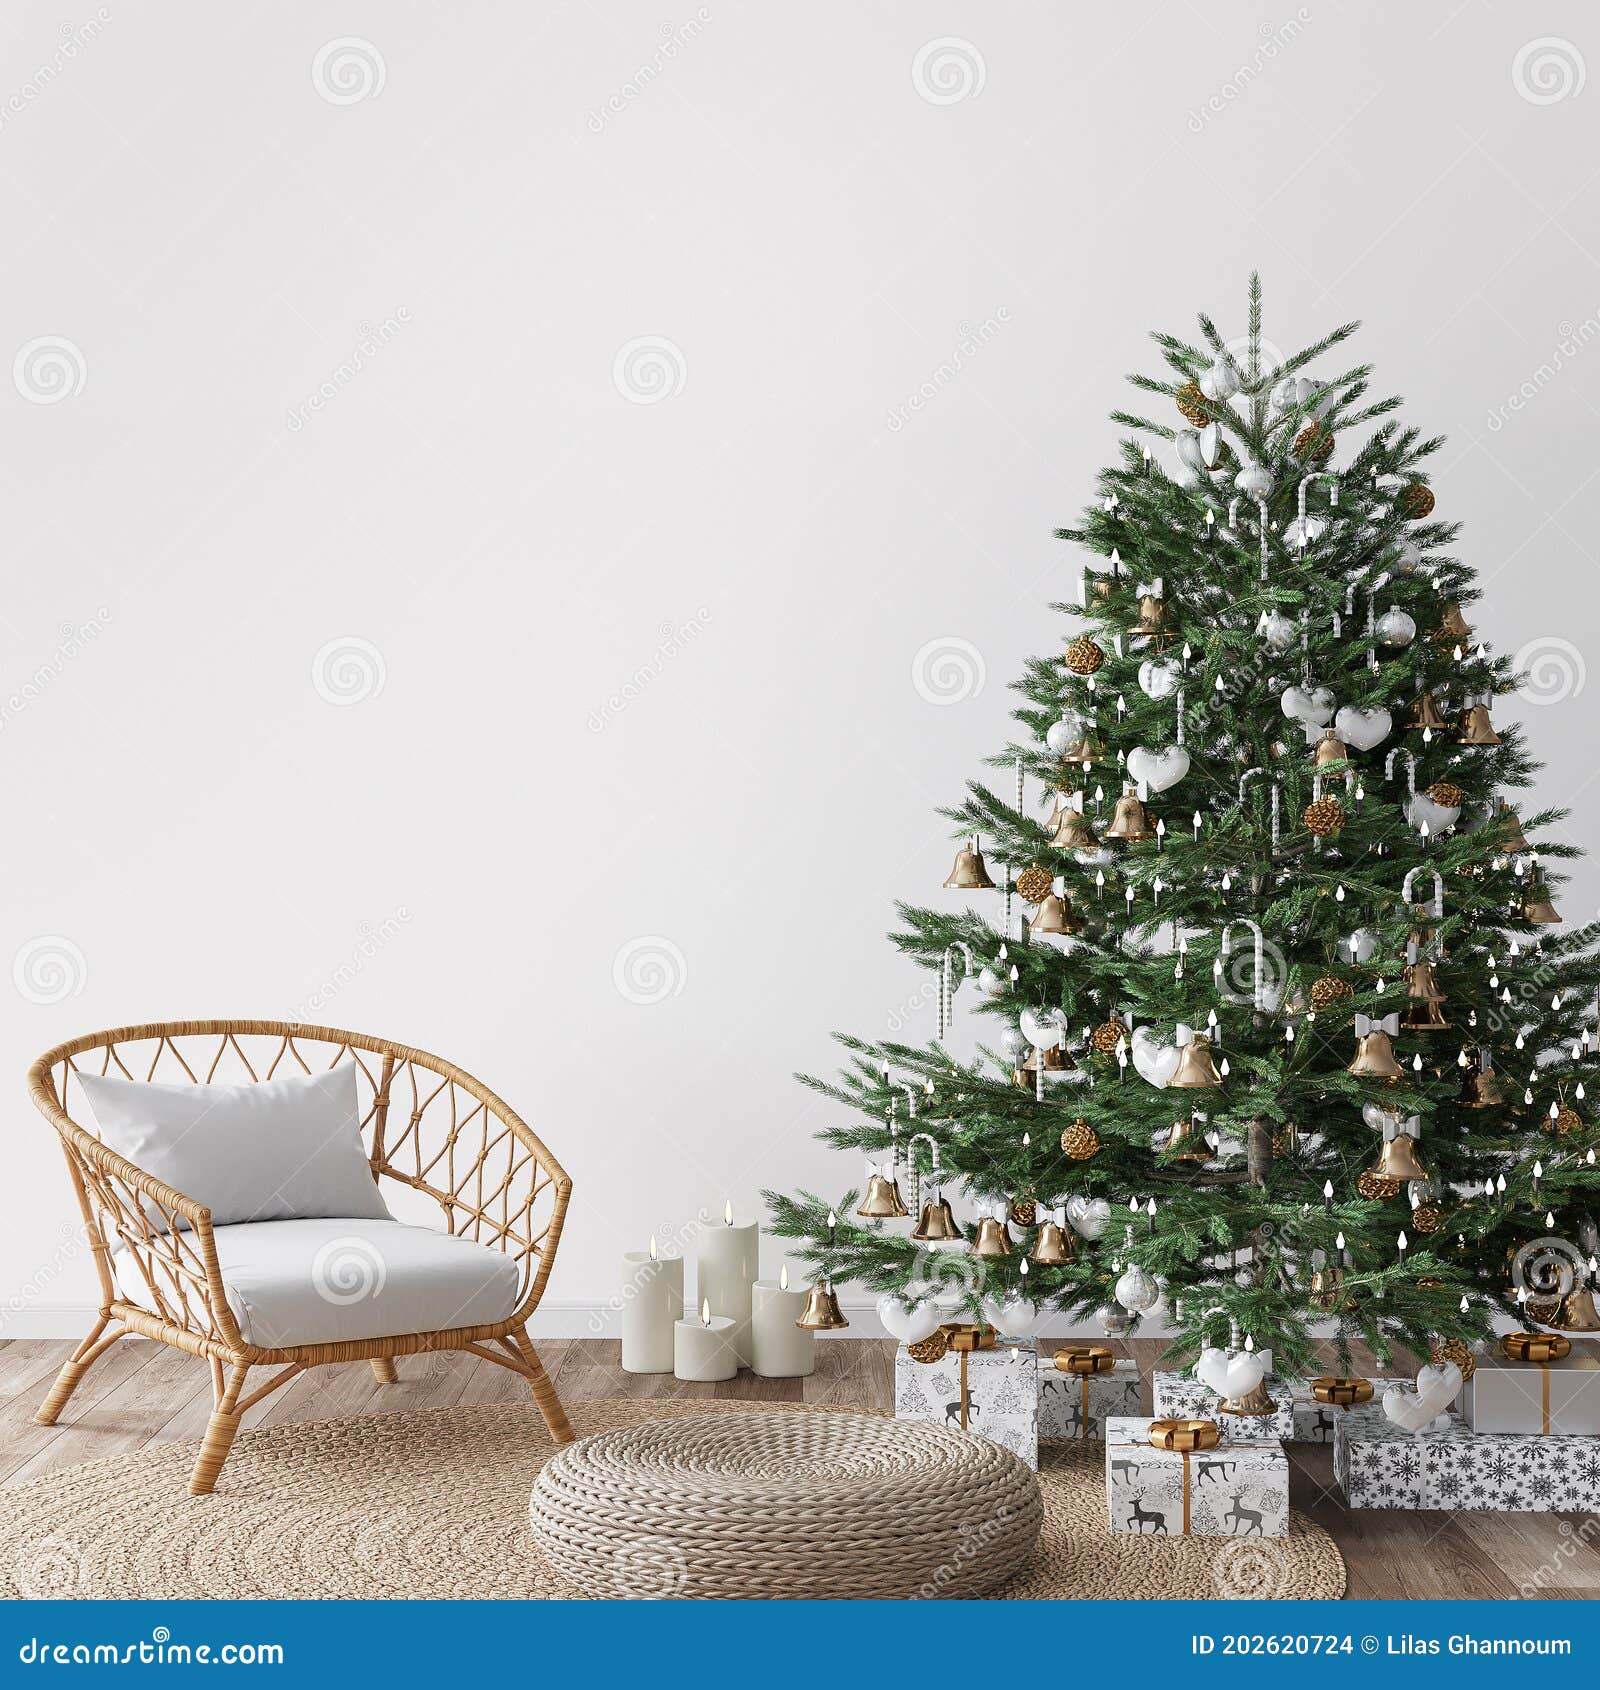 living room christmas interior in scandinavian style. christmas tree with gift boxes